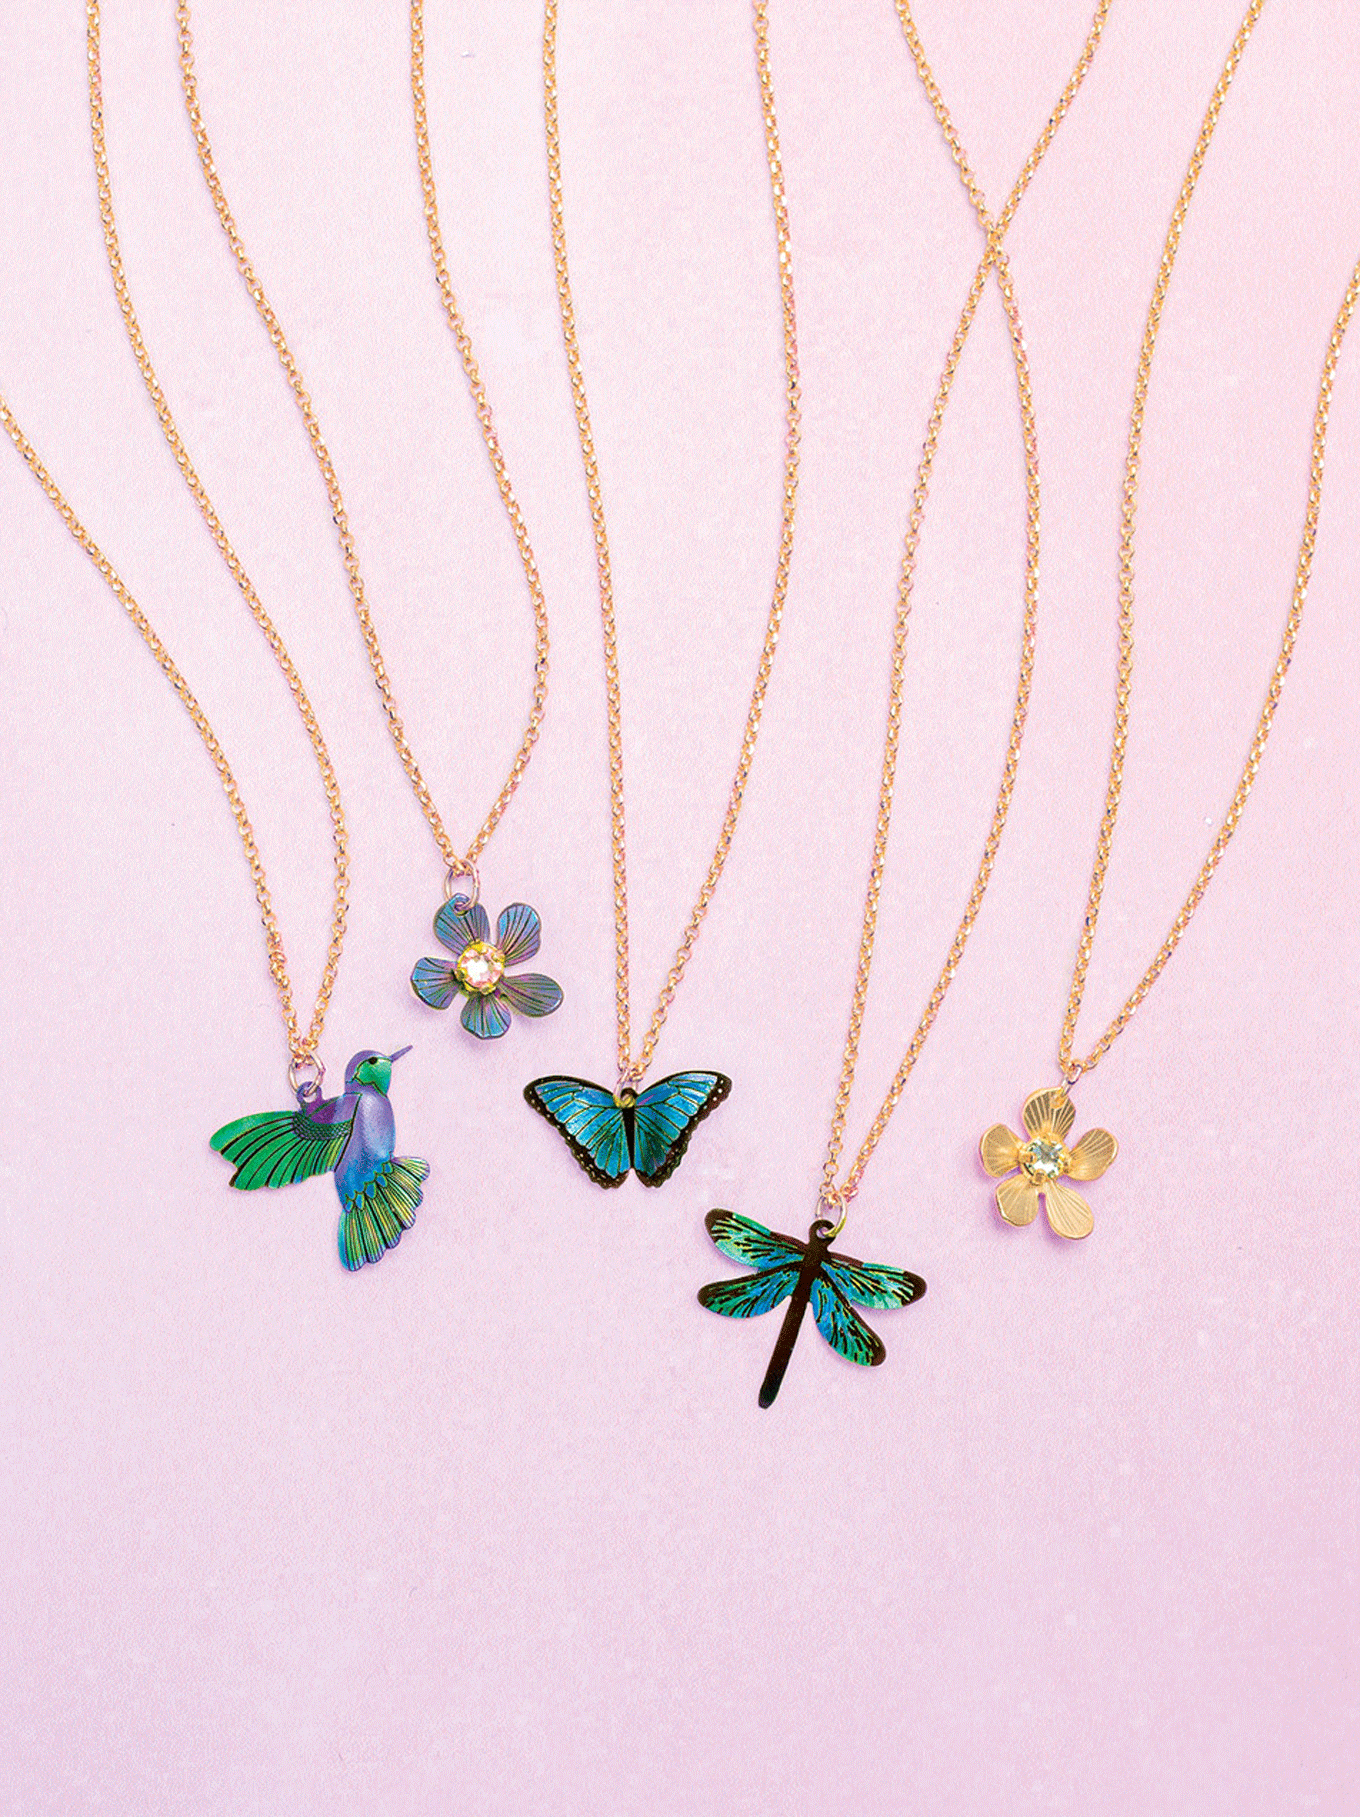 Little Girls Necklace, Girls Jewelry, Toddler Gift Ideas, Little Girl Gift,  Charm Necklace, Butterfly Jewelry, Cute Necklace, GIFT FOR GIRLS 